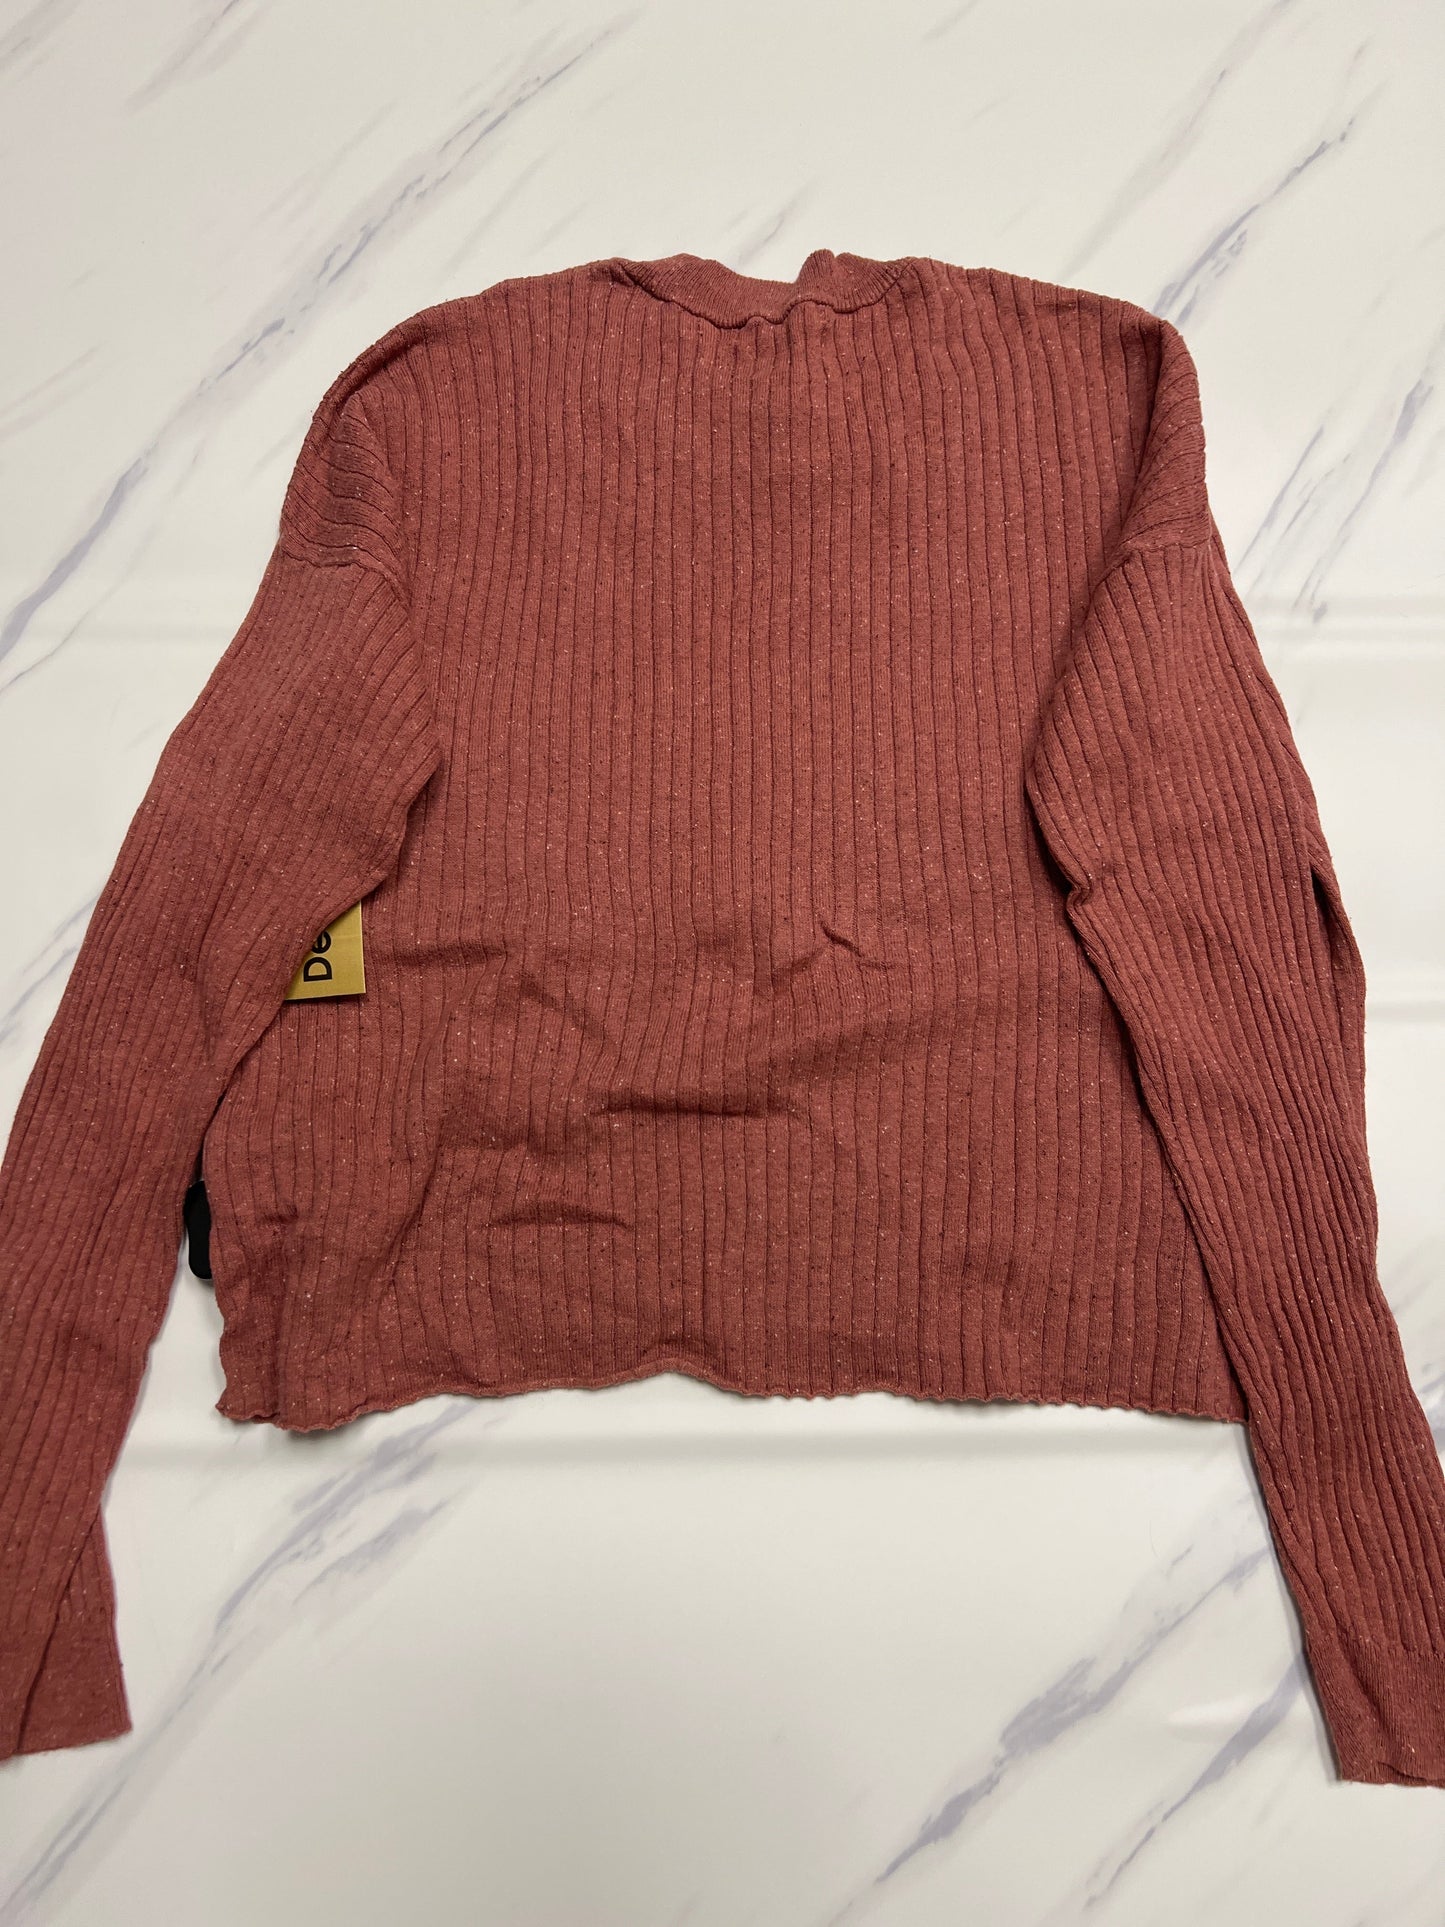 Sweater Designer By Madewell  Size: S